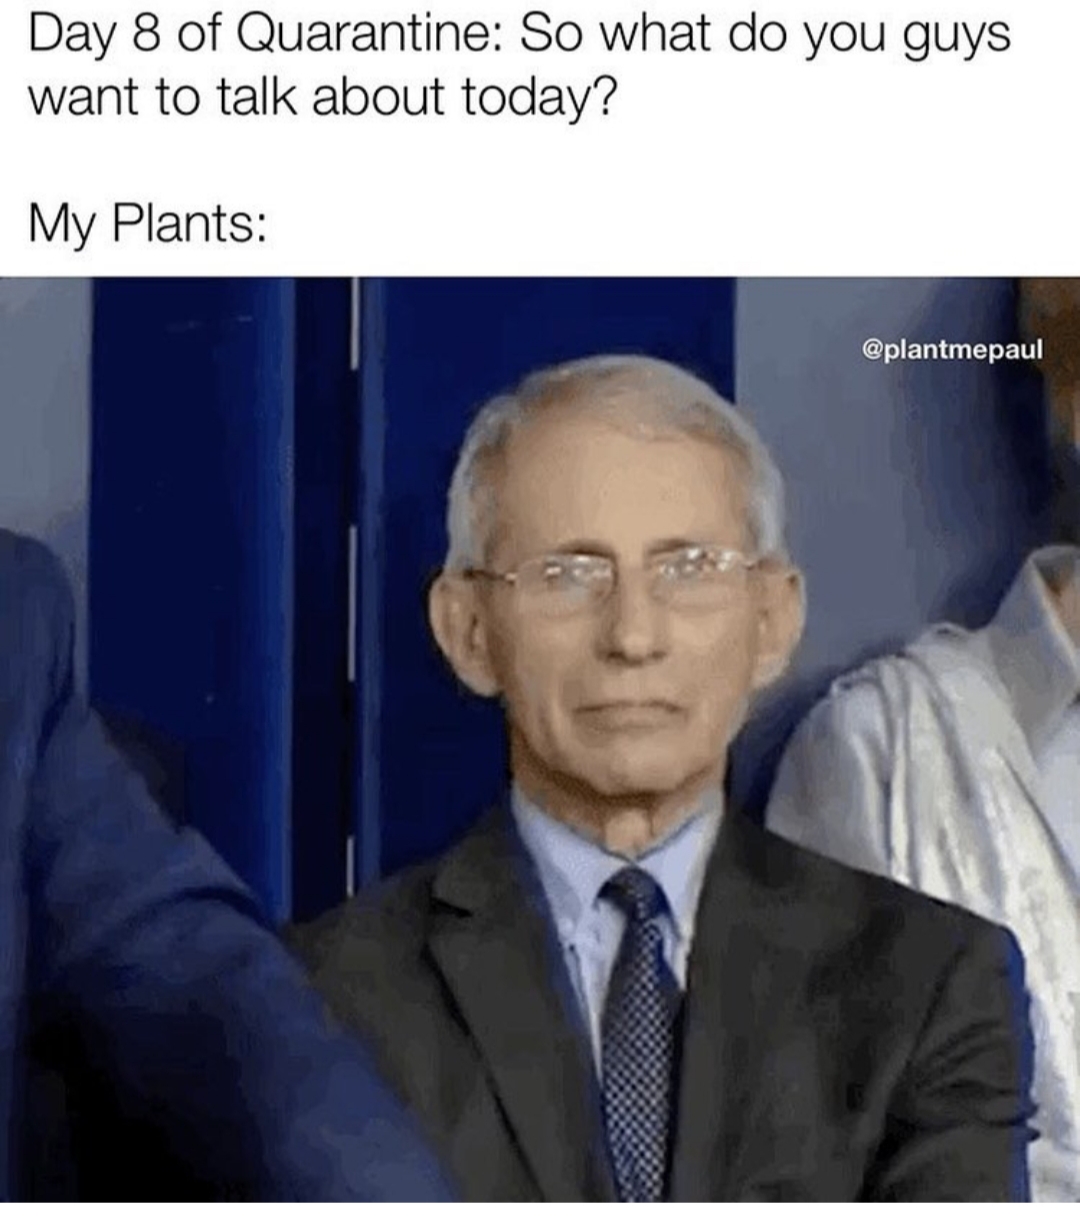 fauci gif - Day 8 of Quarantine So what do you guys want to talk about today? My Plants